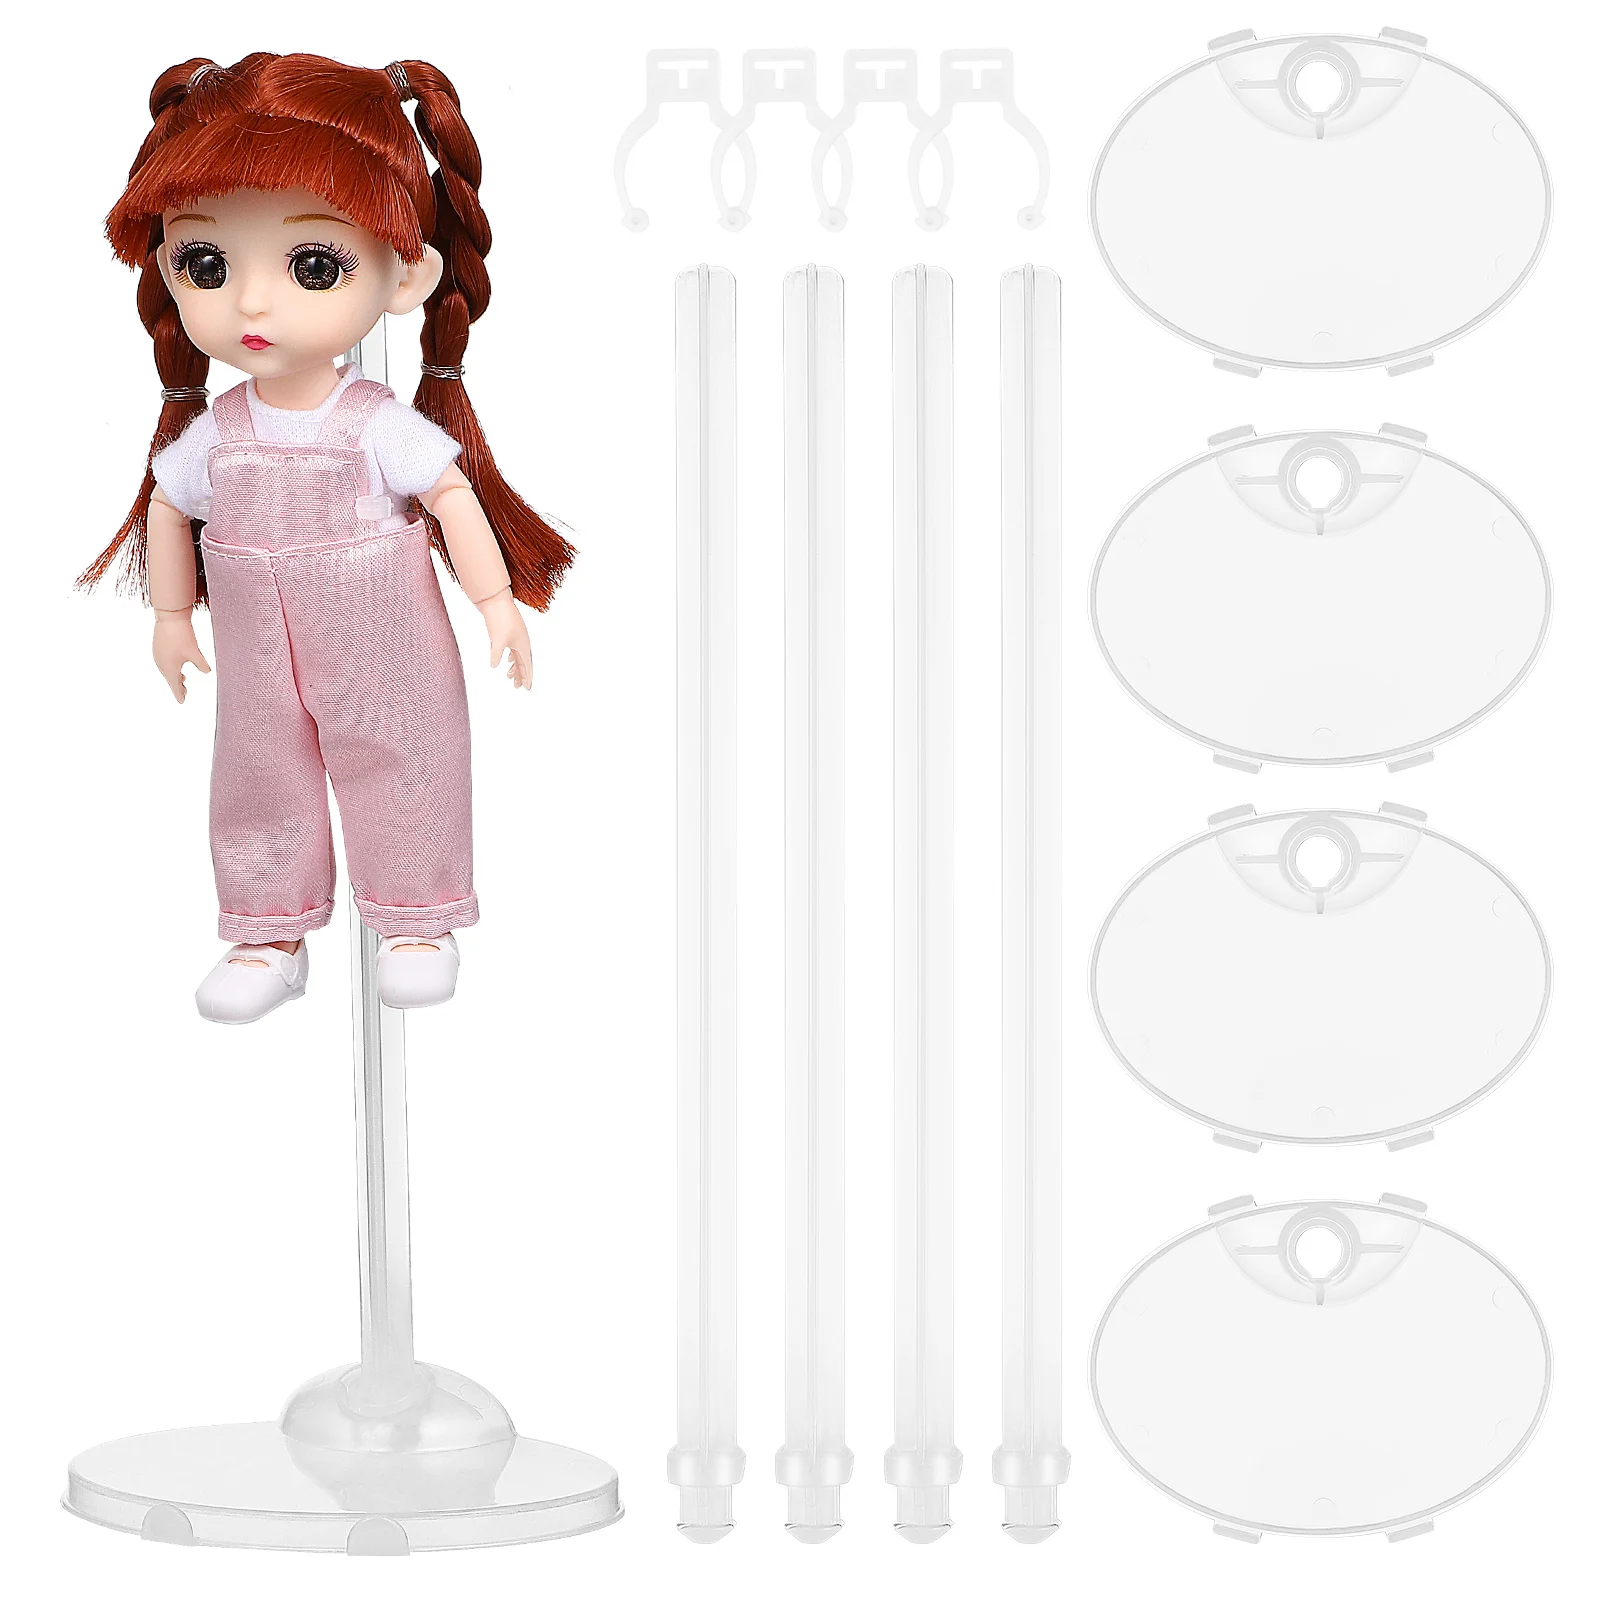 

4 Pcs Display Sturdy Premium Stable Accessories Action Figure Holder Stands Support Stands Brackets Racks